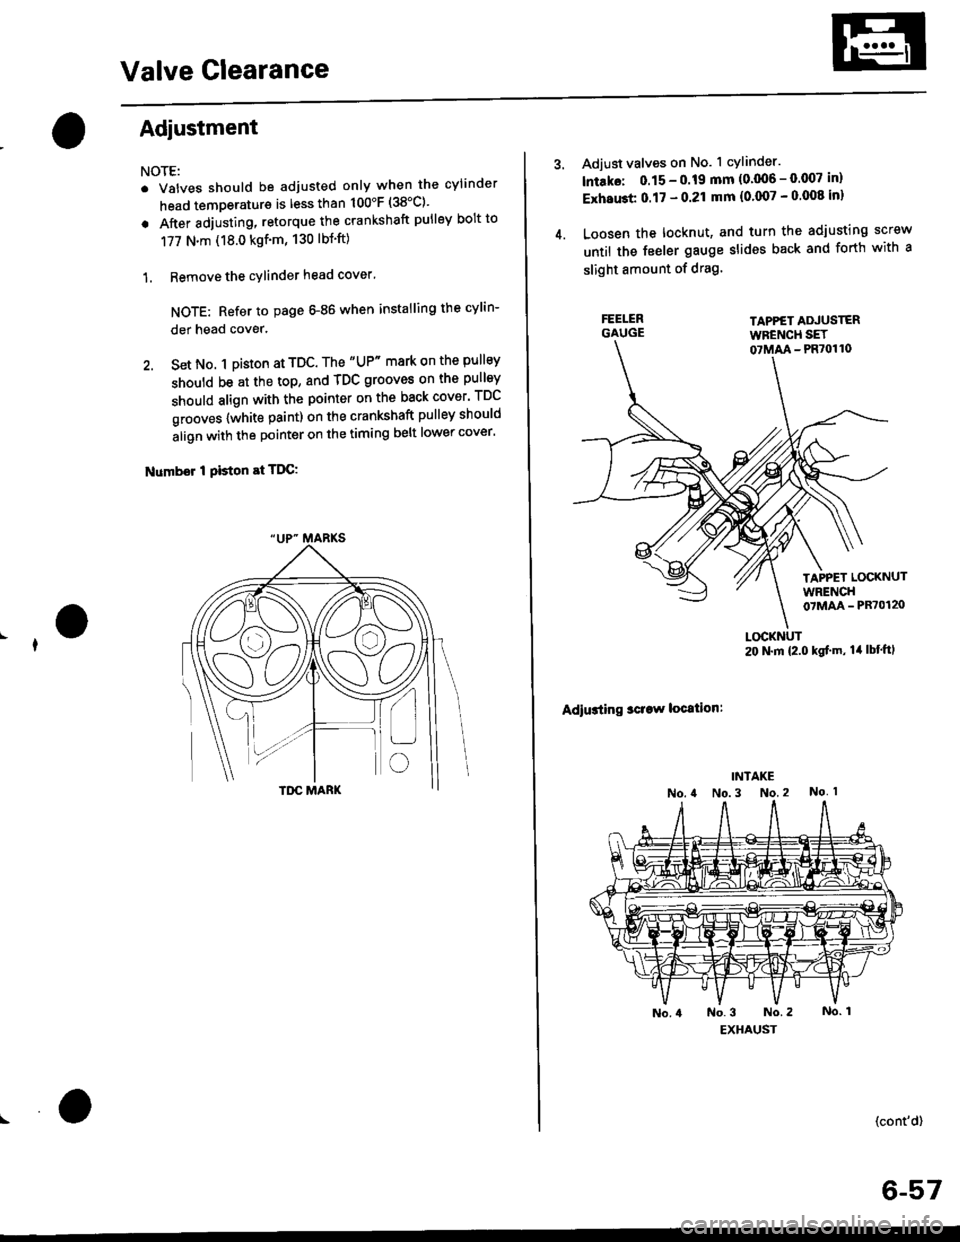 HONDA CIVIC 1998 6.G User Guide Valve Glearance
Adjustment
NOTE:
. Valves should be adjusted only when the cylinder
head temperaturs is less than 100F (38C)
. After adjusting, retorque the crankshaft pulley bolt to
177 N.m (18.0 